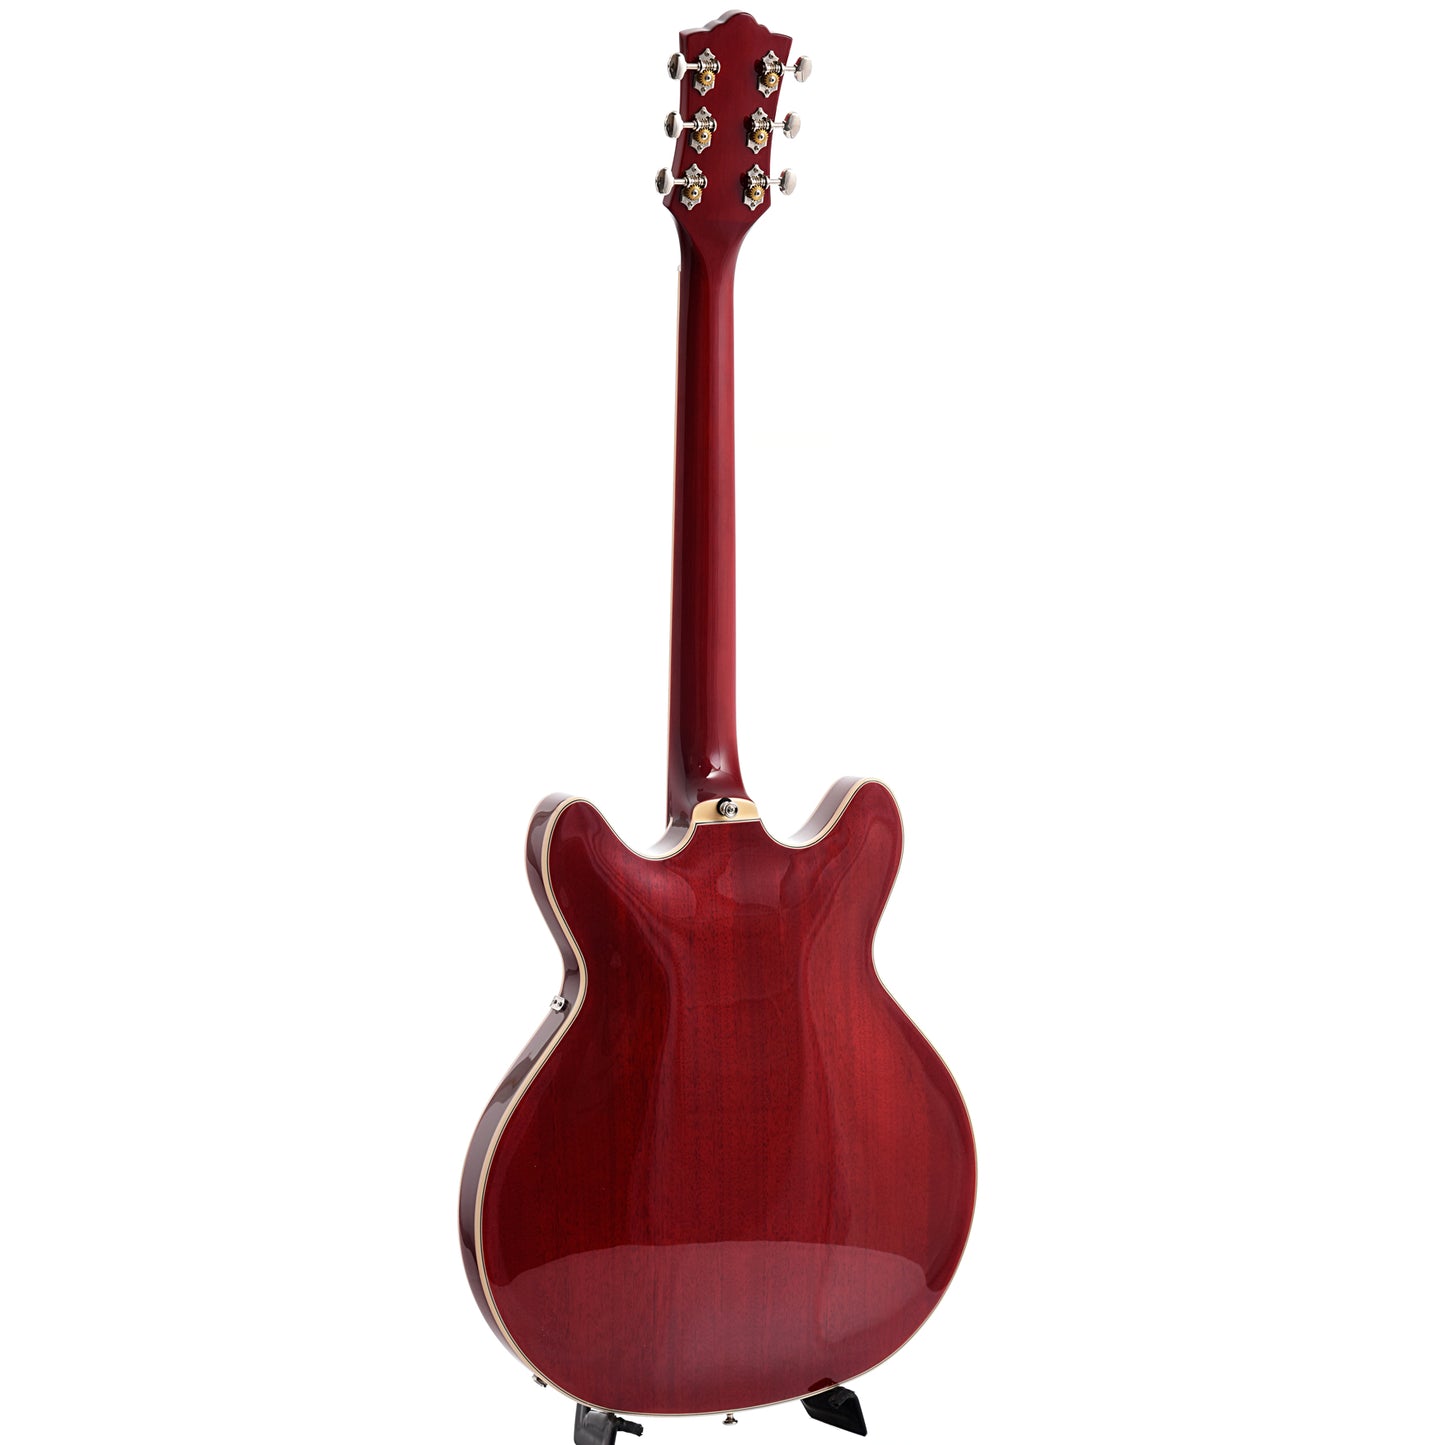 Full back and side of Guild Starfire I Double Cutaway Semi-Hollow Body Guitar, Cherry Red